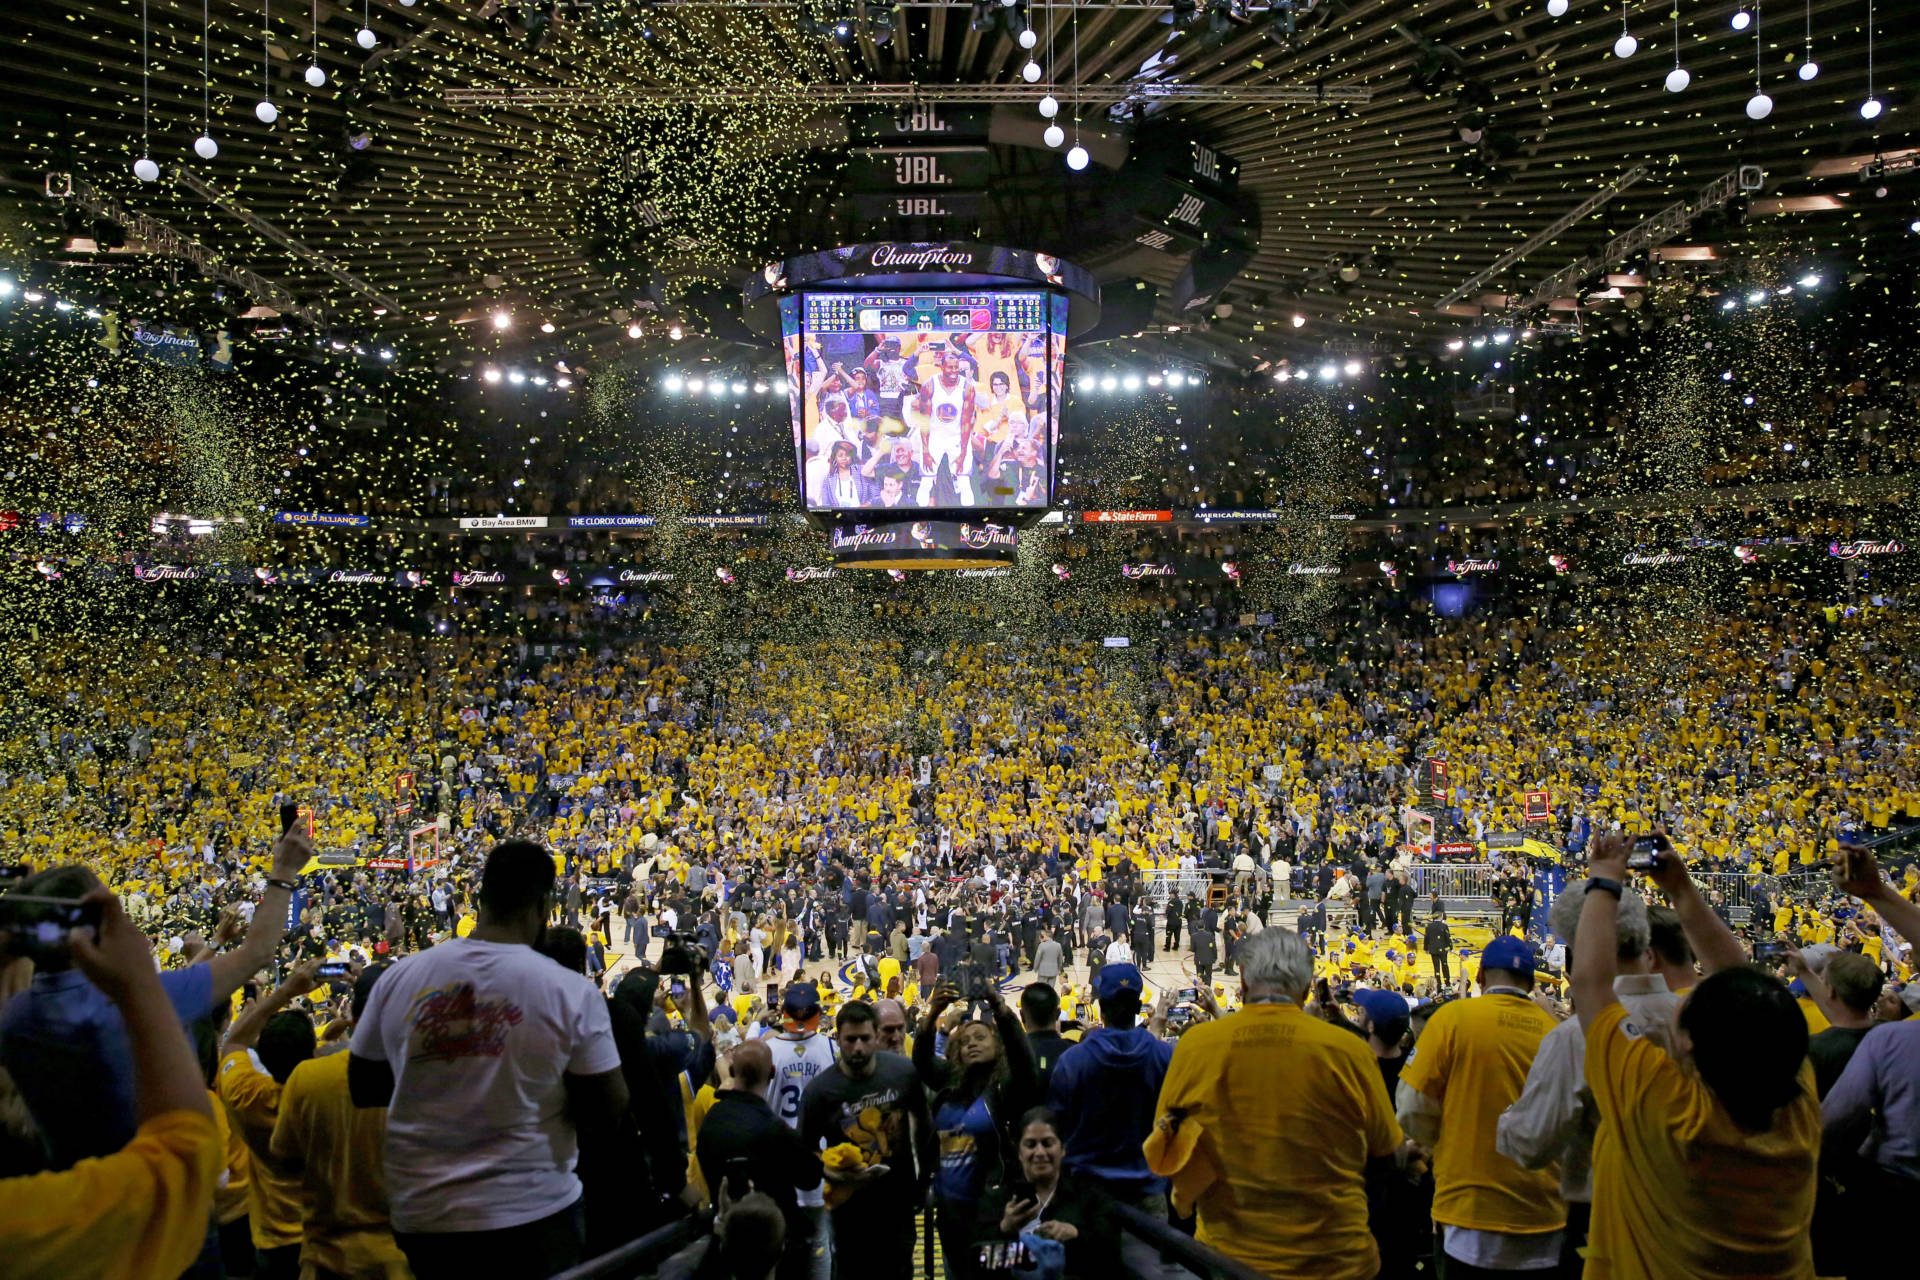 Fans cheer inside Oracle Arena as the Golden State Warriors celebrate their second NBA title in three seasons. Ezra Shaw/Getty Images